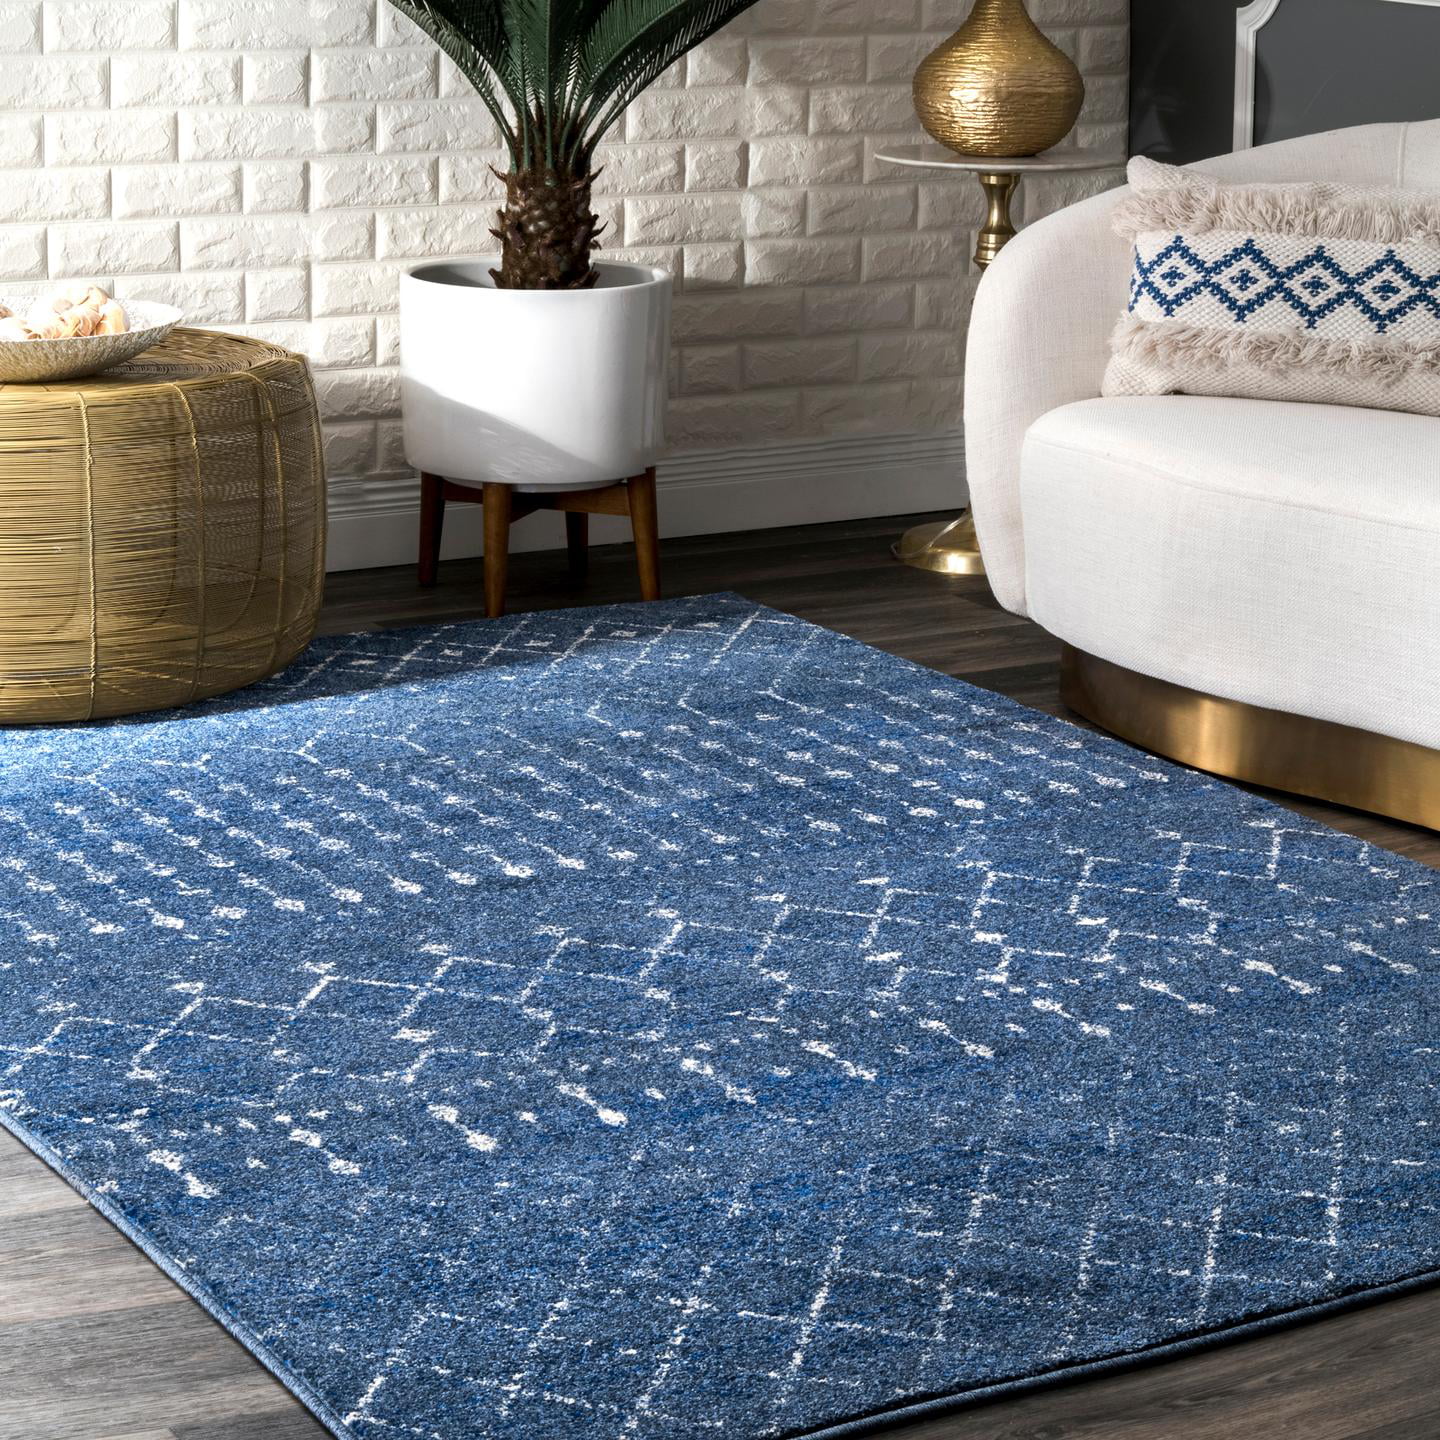 Blue Geometric Moroccan Large Rugs Worn Look Durable Budget Area Mat Runner Rug 